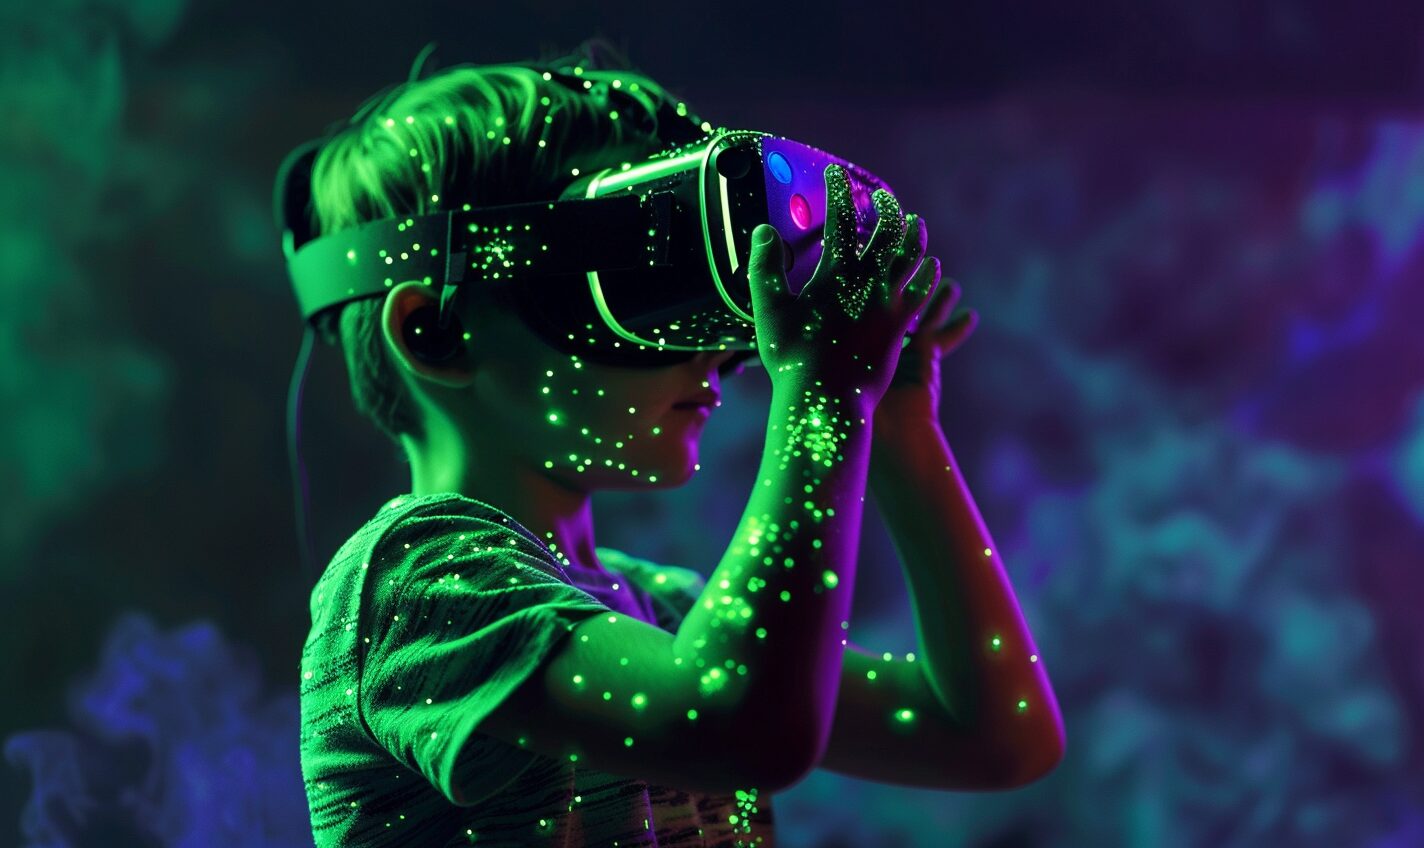 Is VR Safe for Kids? Check Out These Dangers and Minimization Tips